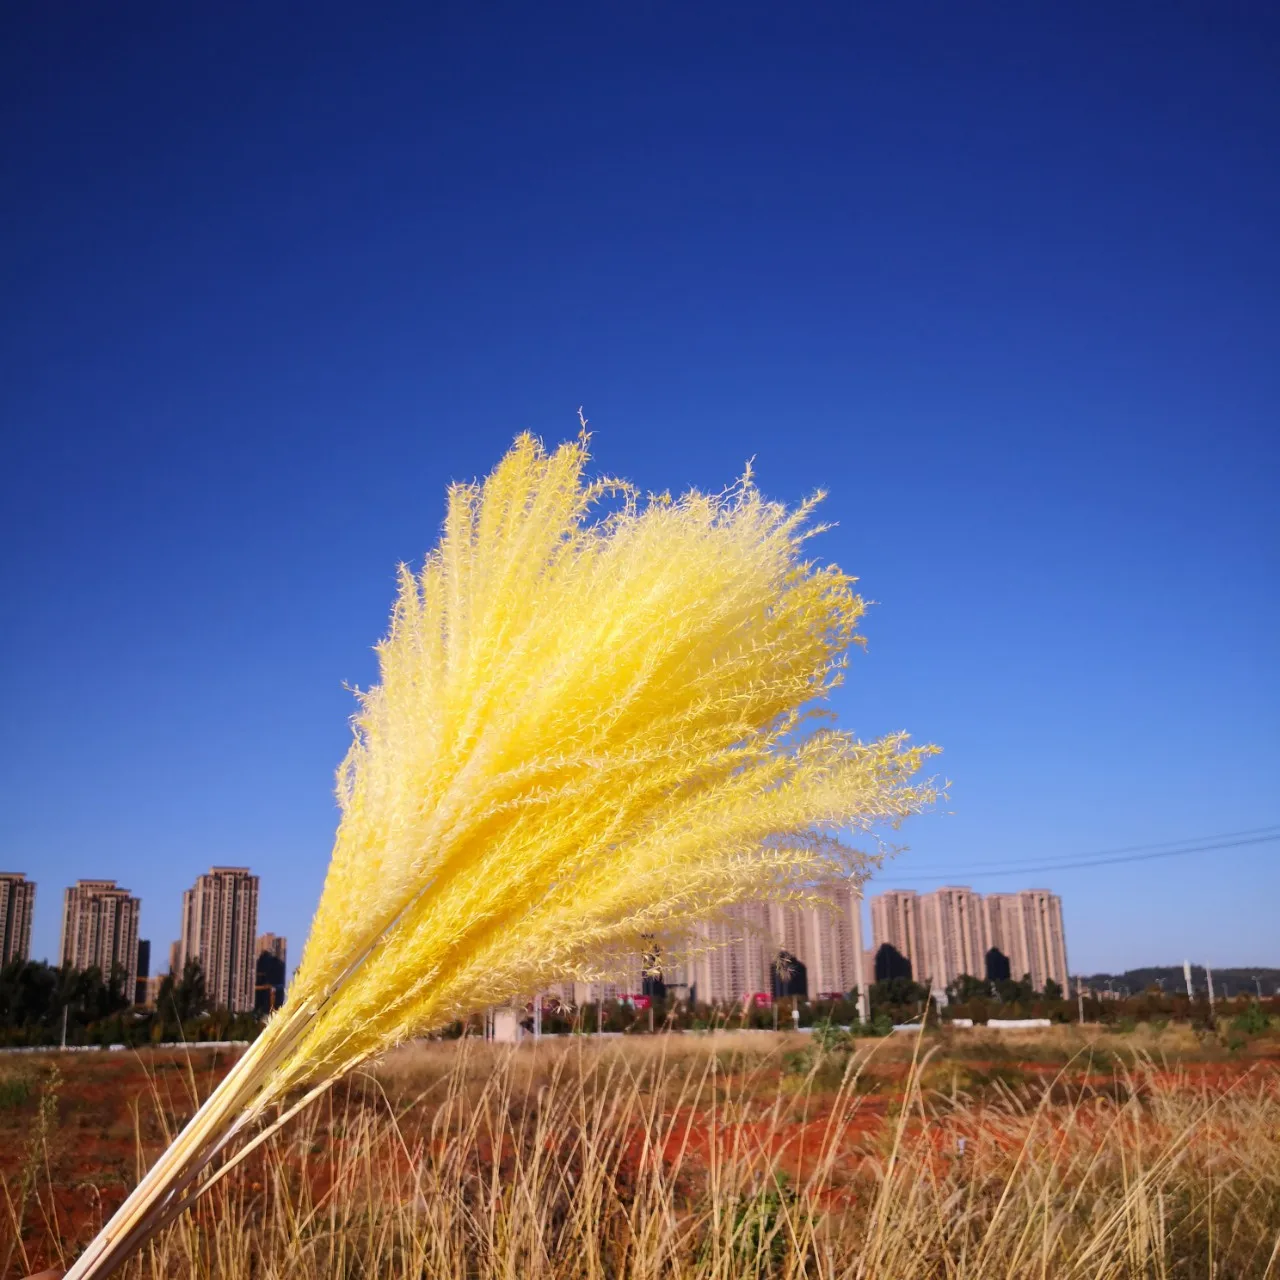 

10Pcs/Bouquet Flores Secas Natural Fluffy Small Preserved Pampas Grass Dried Flowers Party Weddings Horsetail Whisk Wholesale